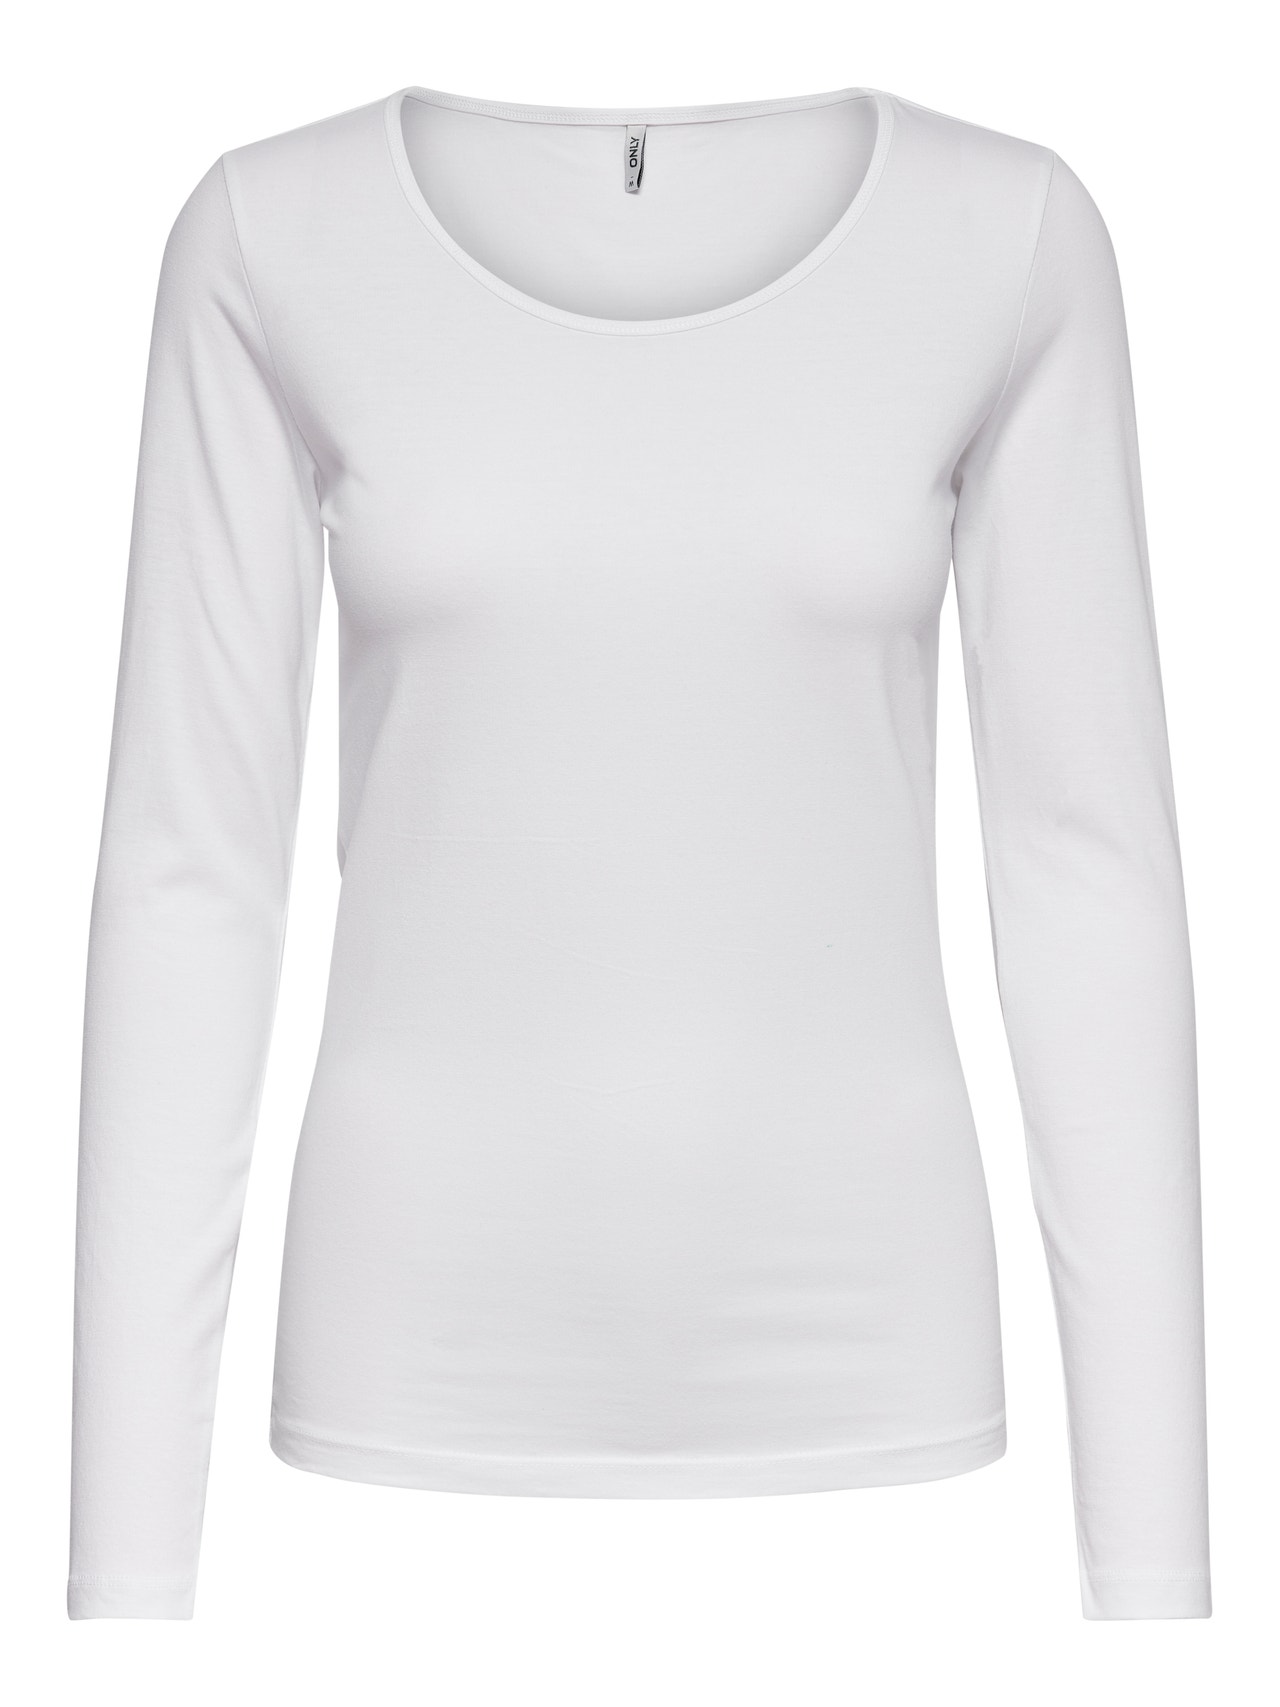 ONLY Basic Top -White - 15204712